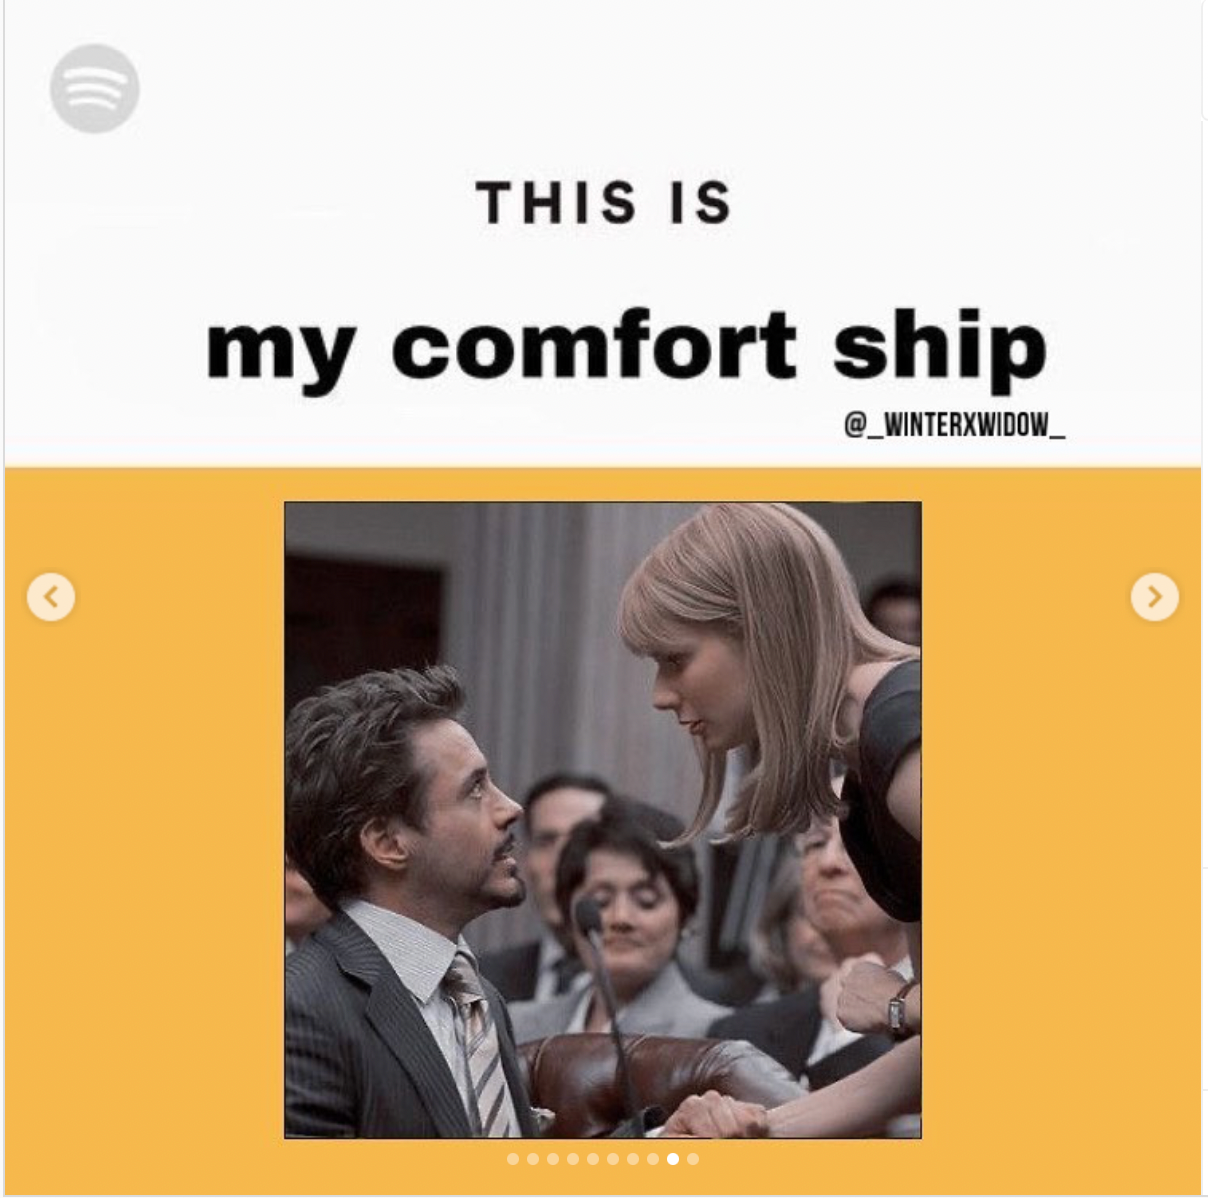 Tony Stark and Pepper Potts are labelled a poster's 'comfort ship' in front of a yellow background.